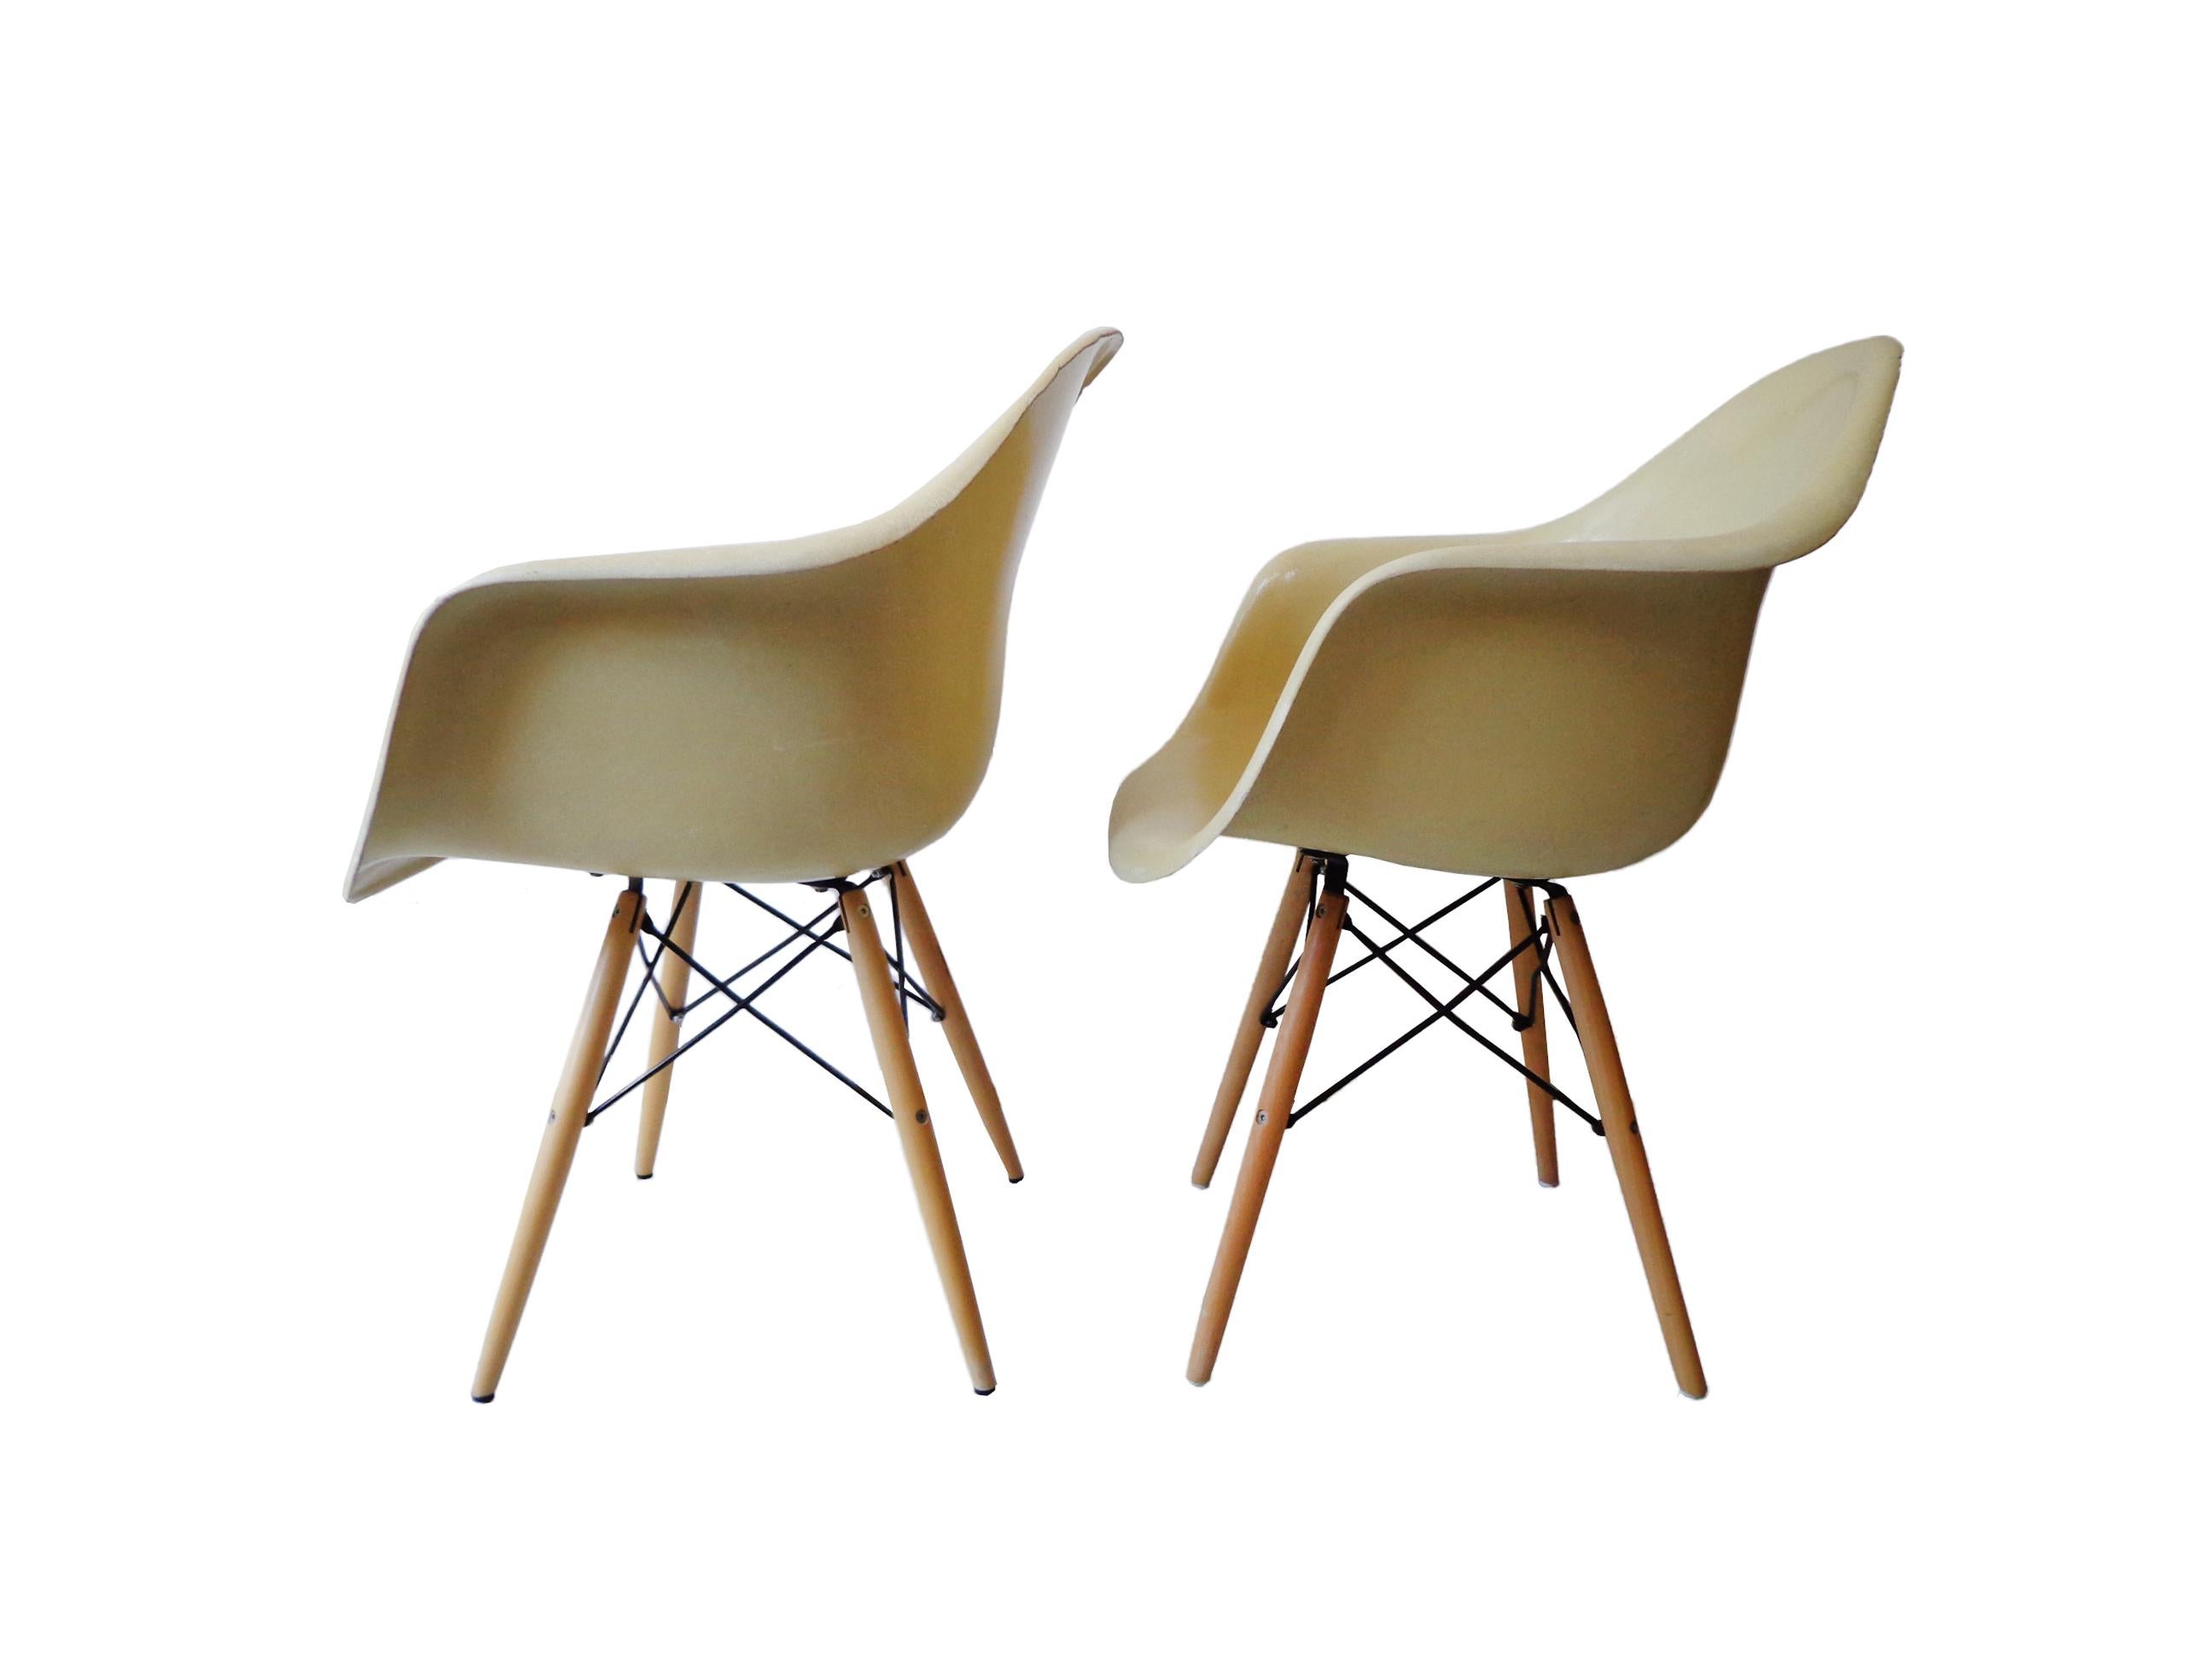 Late 20th Century Mid-Century Modern Charles Eames Herman Miller Fiberglass Dining Chairs, 1960s For Sale